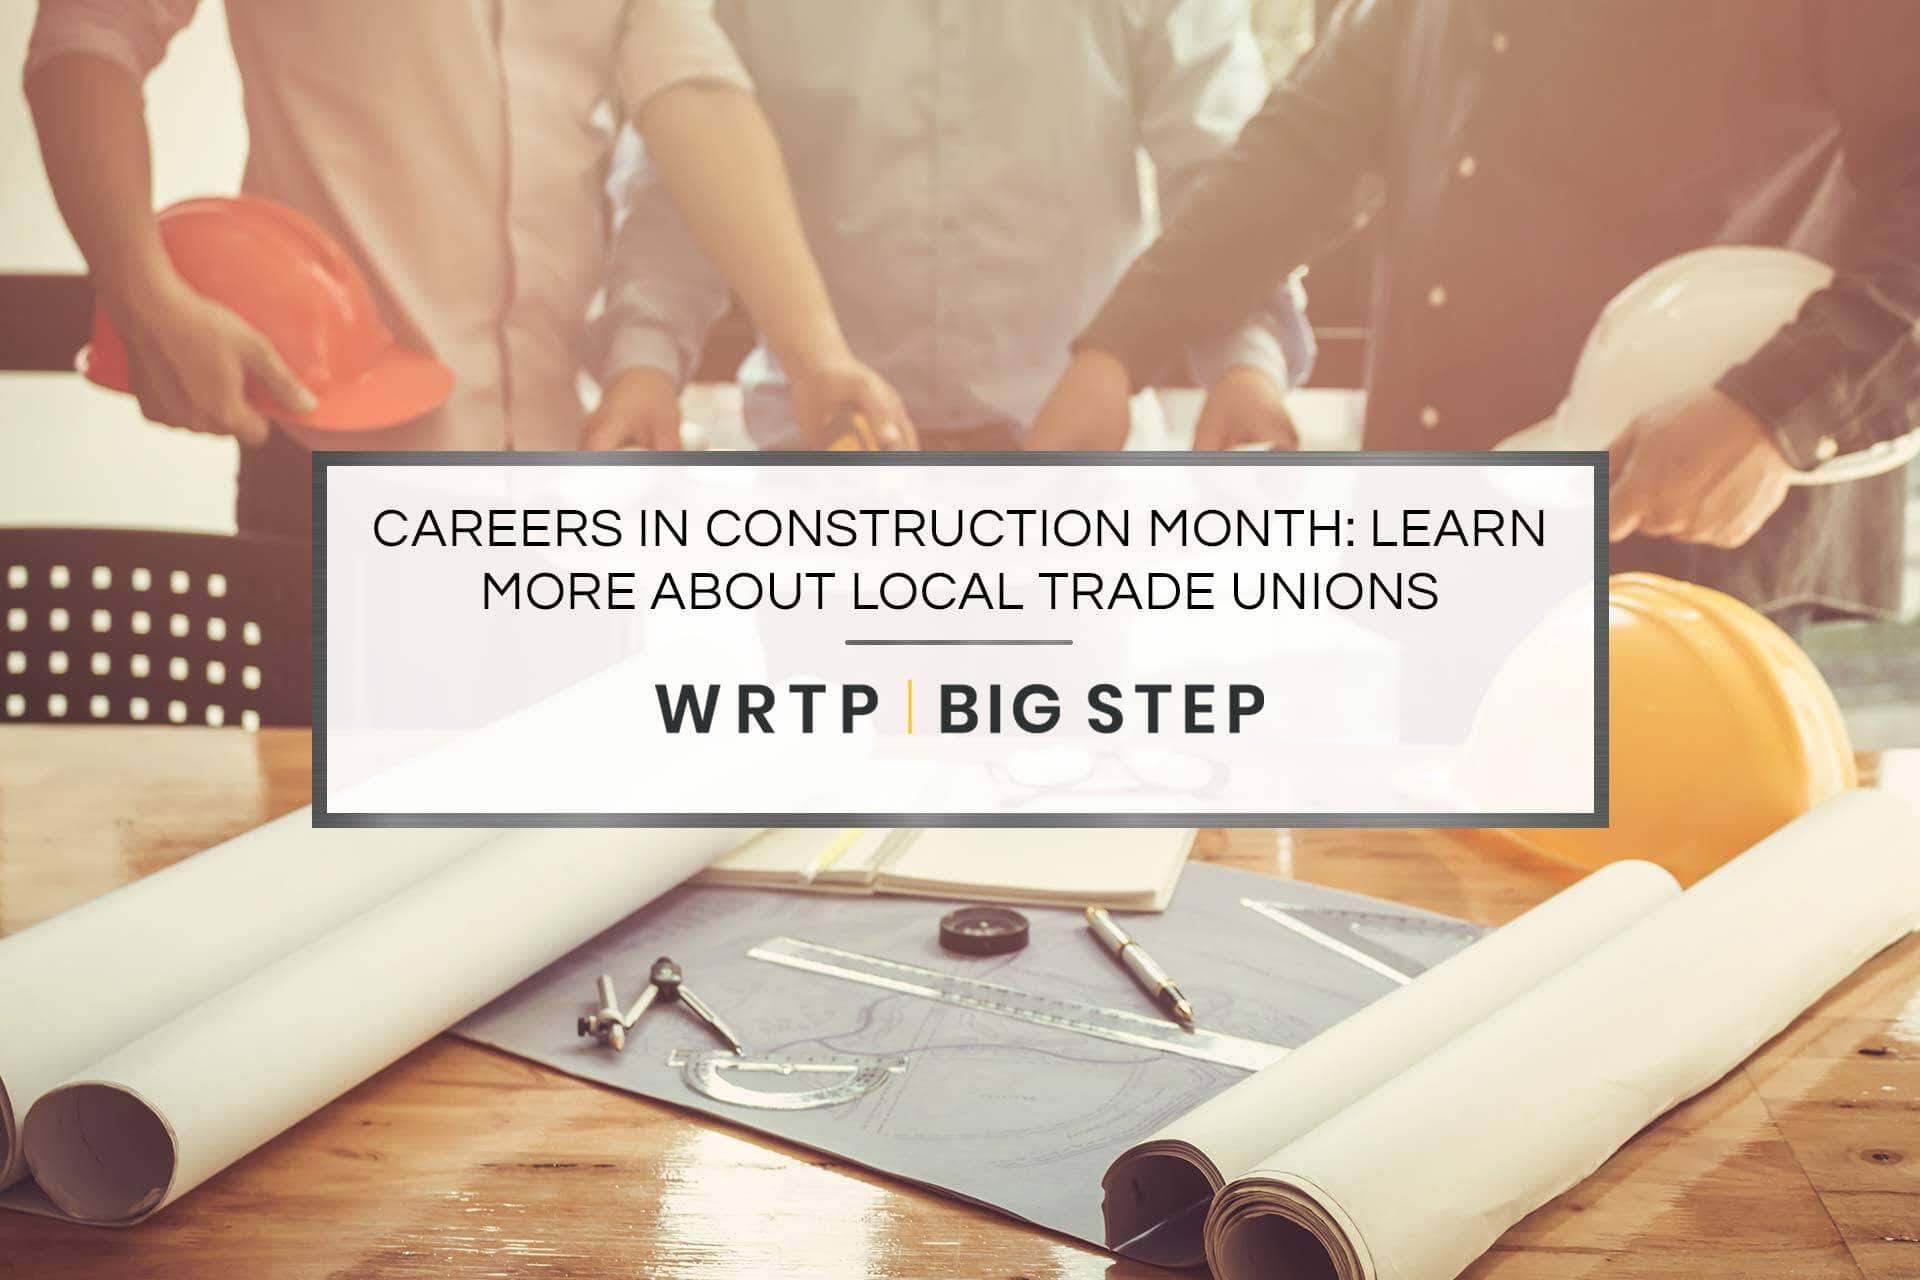 Careers in Construction Month: Learn More About Local Trade Unions